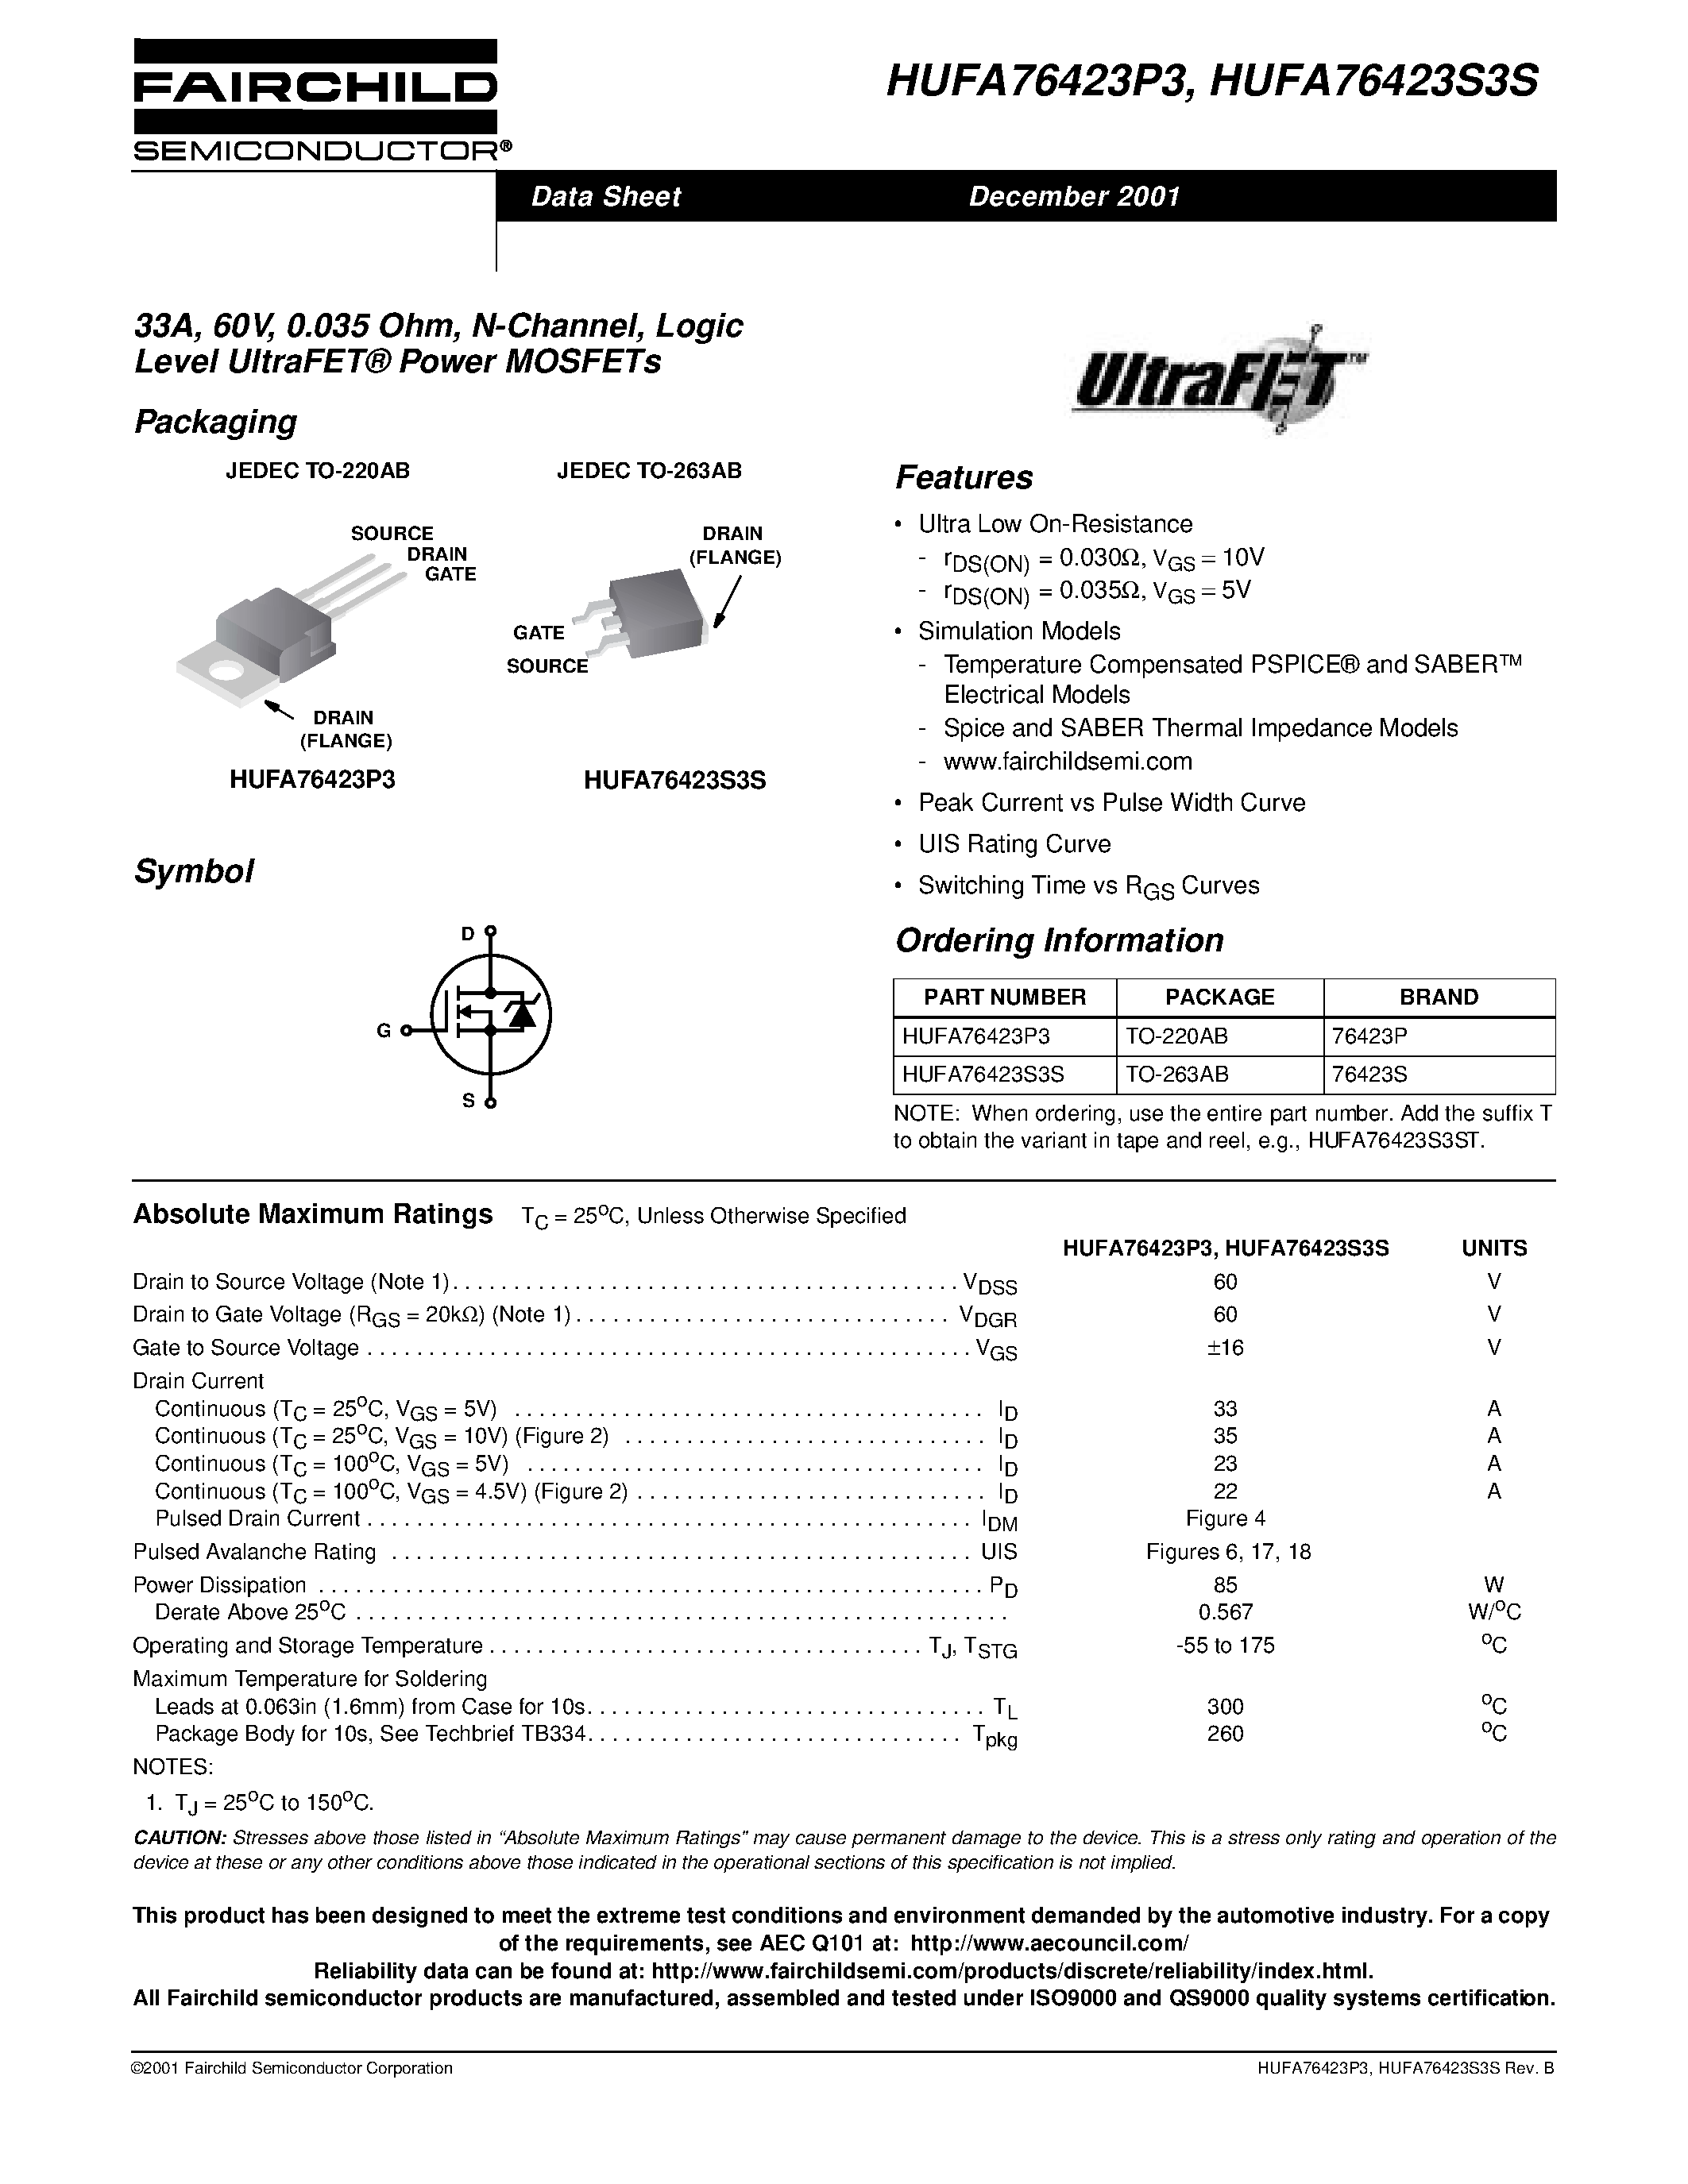 Datasheet HUFA76423S3S - 33A/ 60V/ 0.035 Ohm/ N-Channel/ Logic Level UltraFET Power MOSFETs page 1